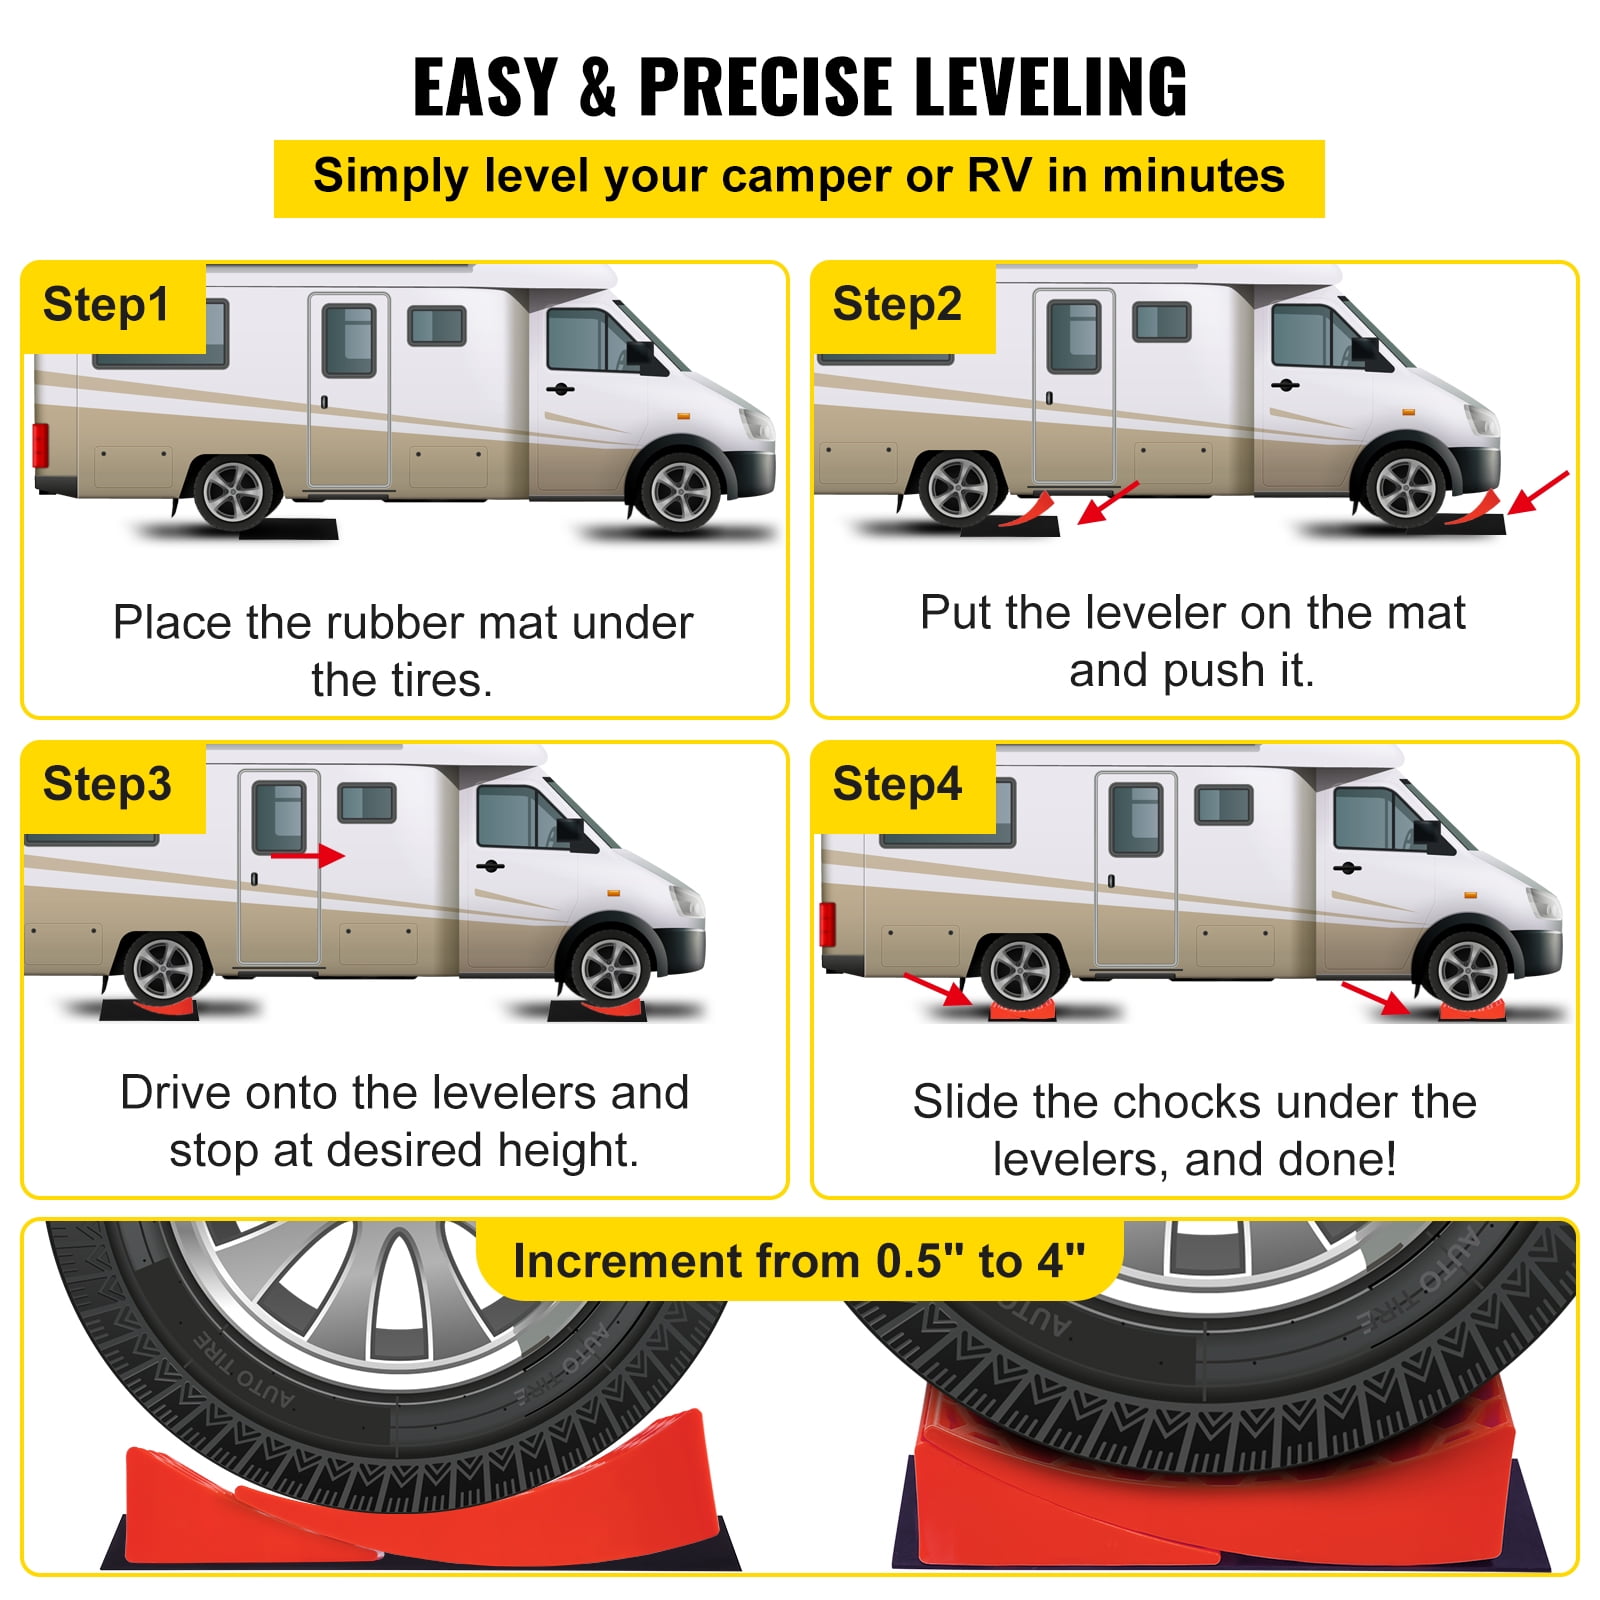 Faster Camper Leveling Than RV Leveling Blocks - Two Chocks Eazy2hD Camper Leveler Kit 2 Pacs Precise RV Leveler System and Two Rubber Grip Mats Includes Two Curved Levelers Blue + Black 